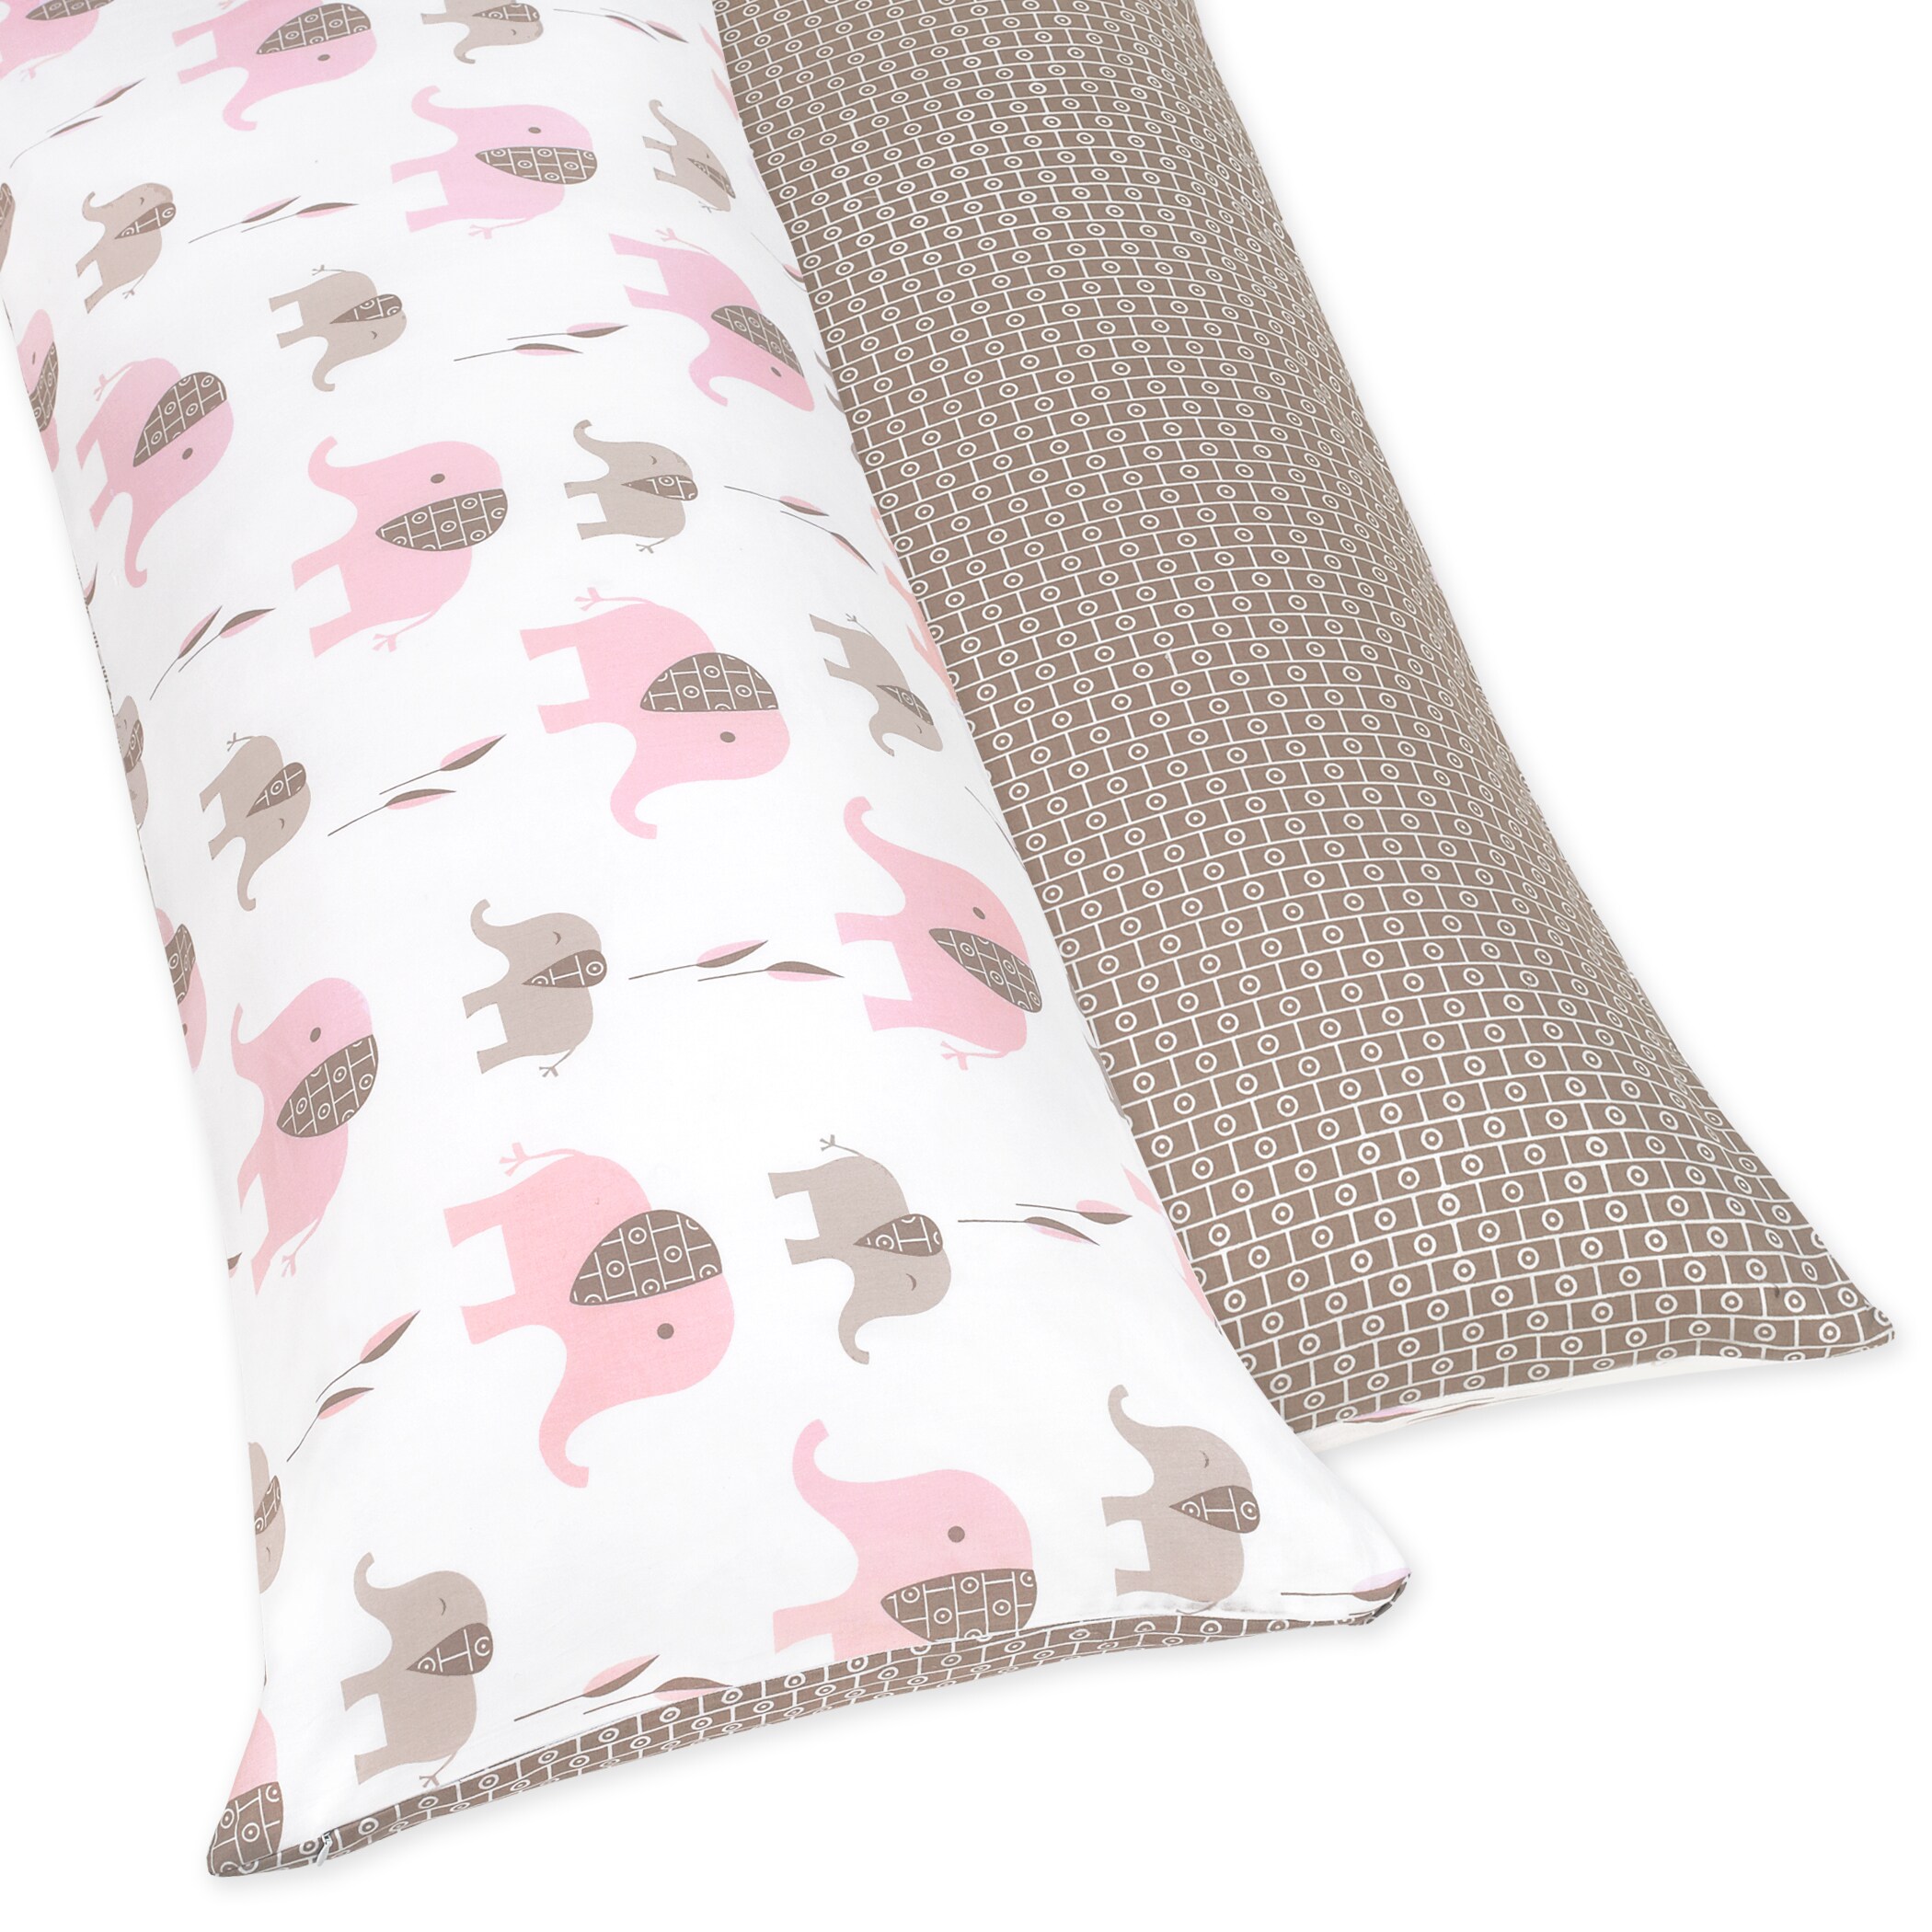 Sweet Jojo Designs Pink And Taupe Mod Elephant Full Length Double Zippered Body Pillow Case Cover (Elephant print/ mod geometric printThread count 200 Materials 100 percent cottonZipper closures on both sides for easy useCare instructions Machine washa